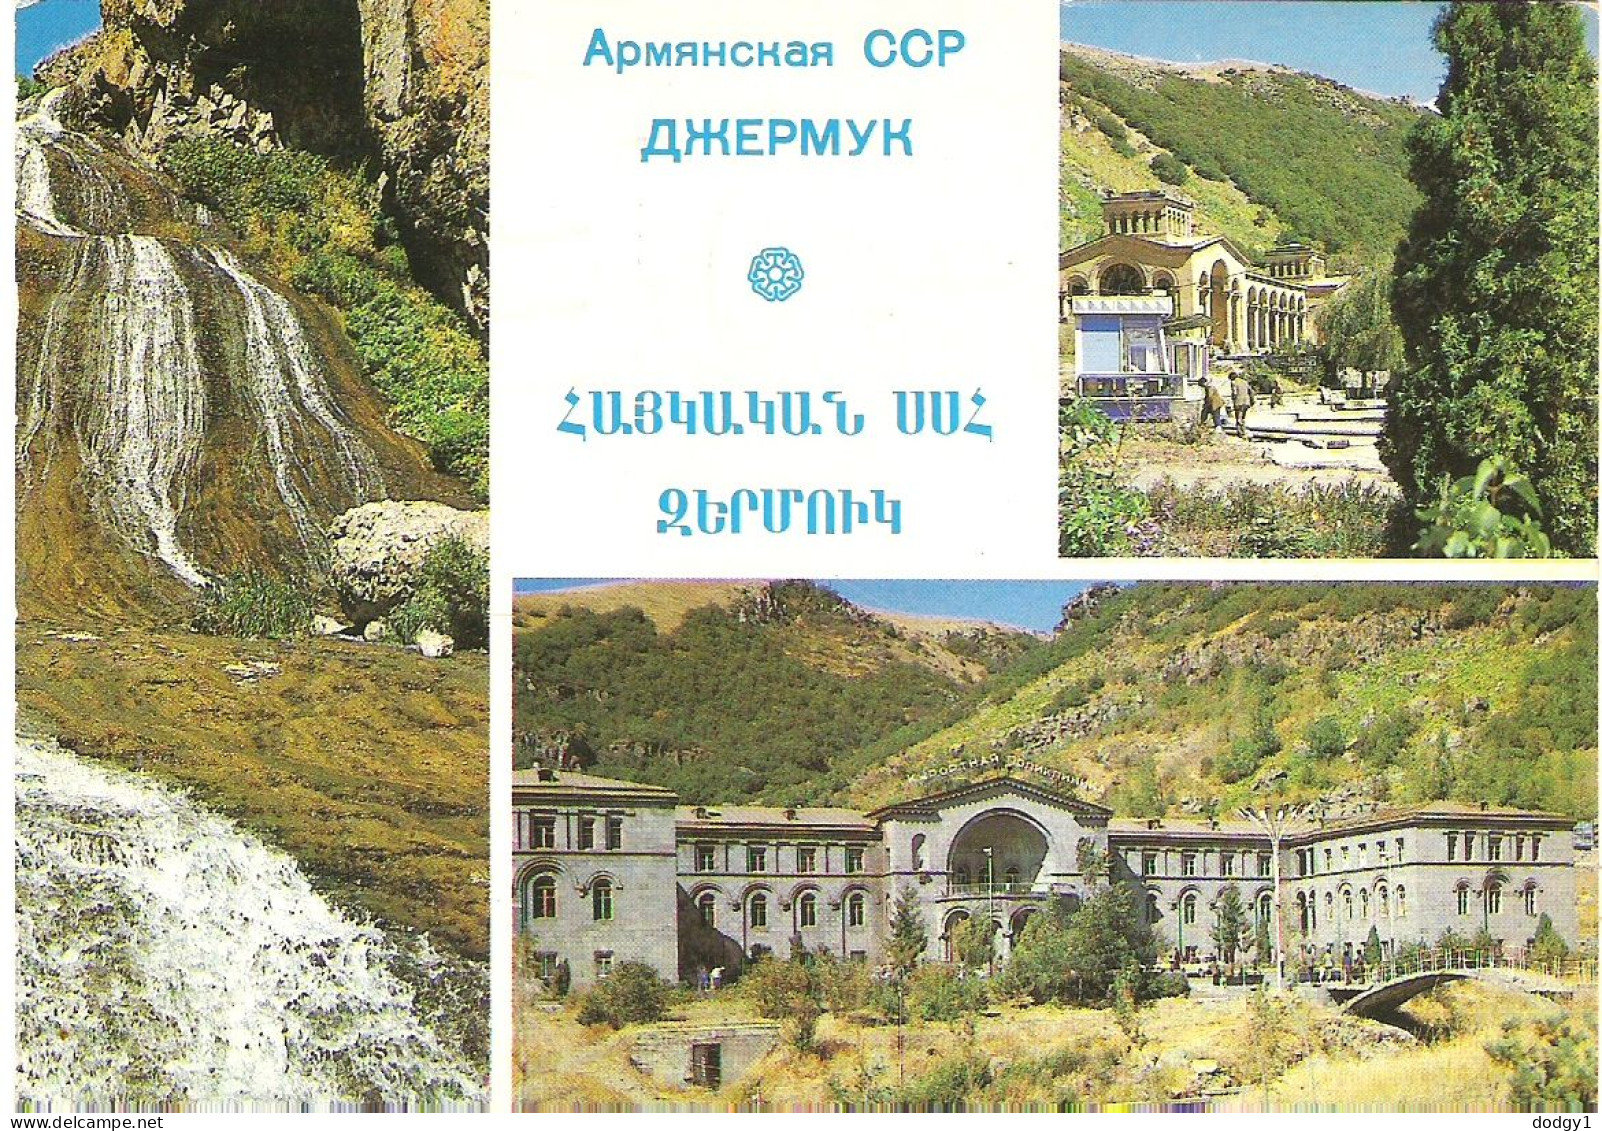 SCENES FROM RUSSIA. USED POSTCARD Mm6 - Russia